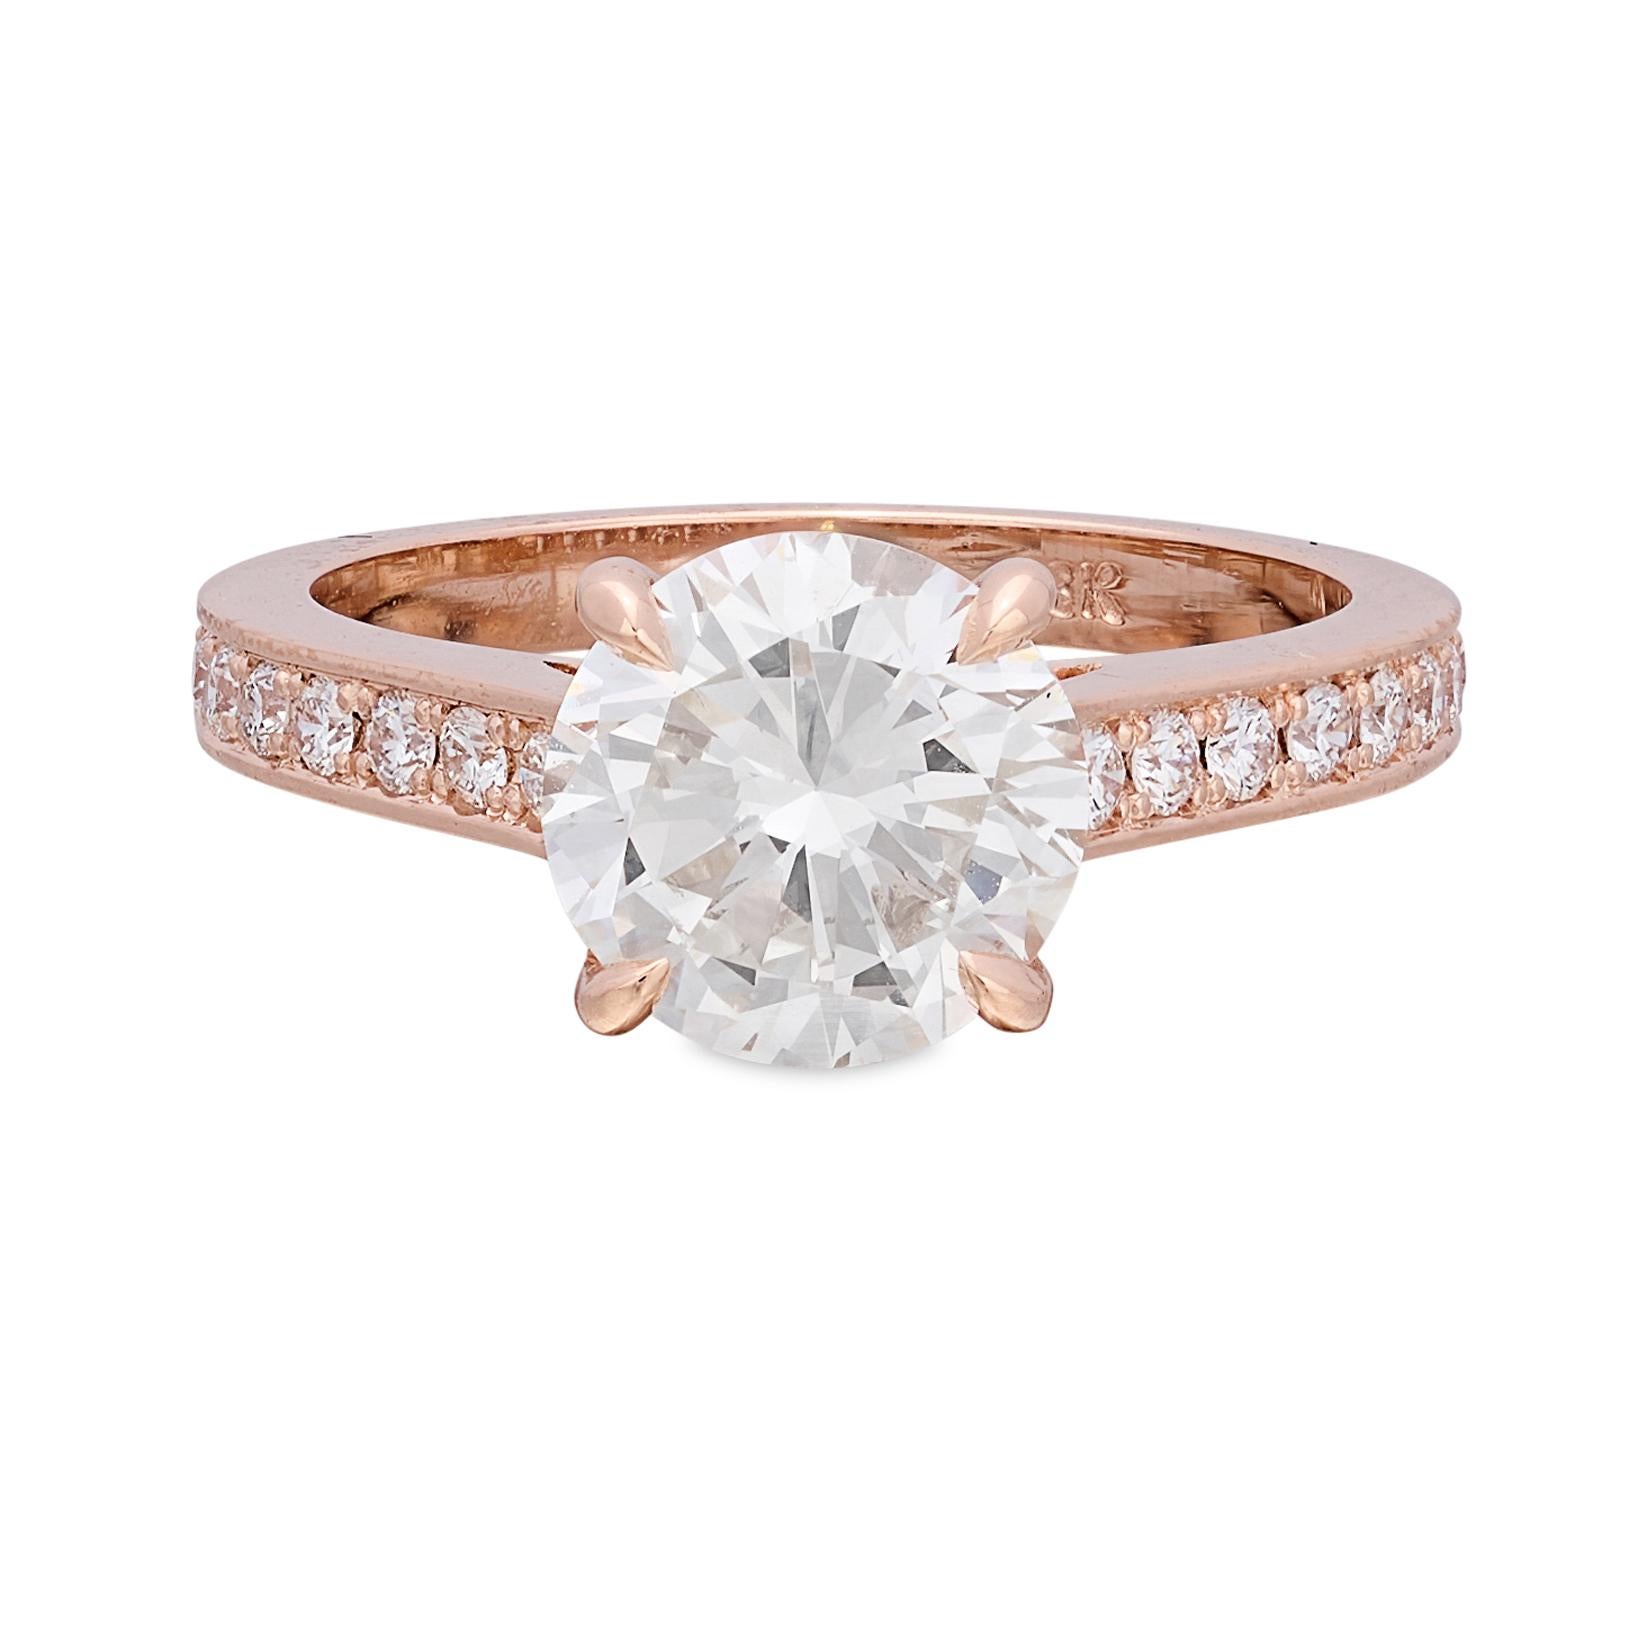 Gorgeous GIA 2.22 Carat Rose Gold Diamond Ring In New Condition For Sale In San Francisco, CA